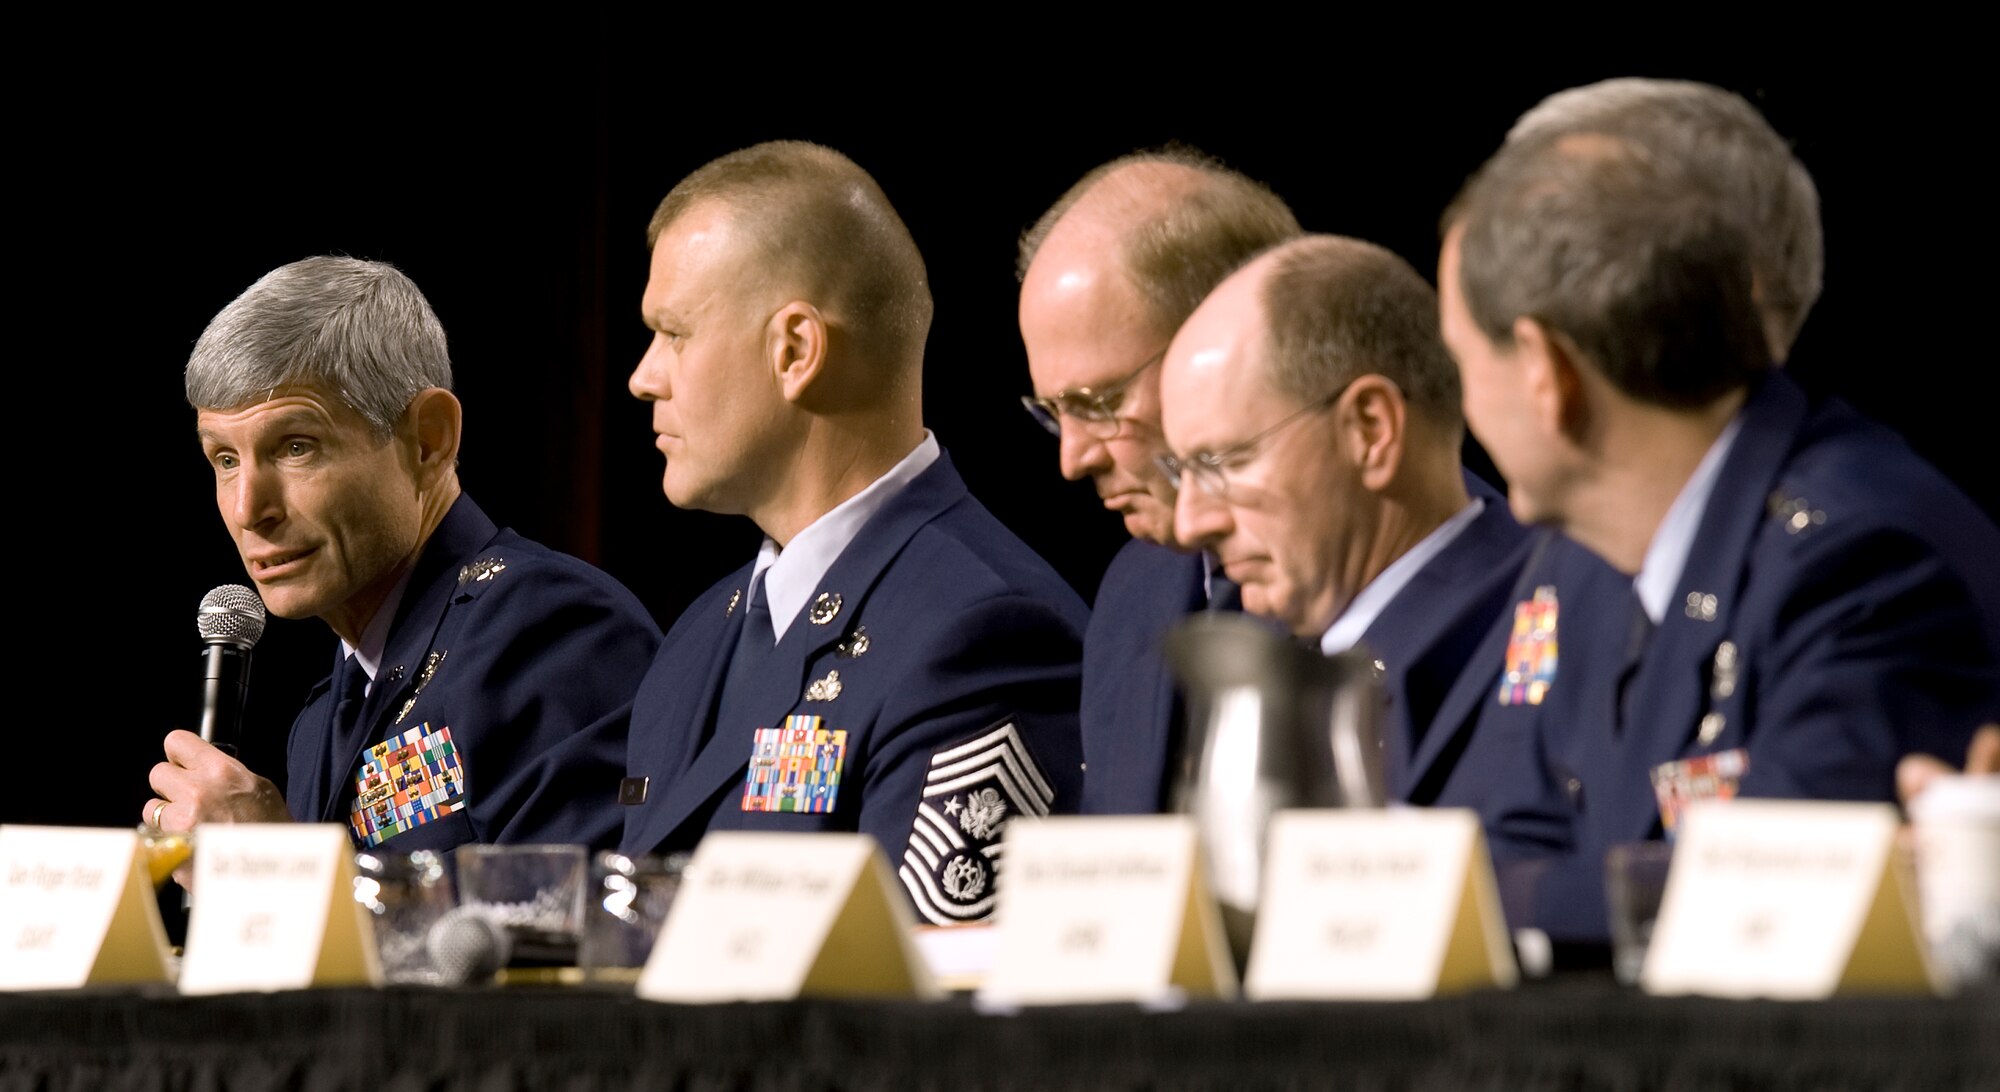 Air Force Chief of Staff Gen. Norton Schwartz (left) answers a question during a four-star forum Sept. 15, 2010, at the Air Force Association 2010 Air and Space Conference and Technology Exposition at National Harbor in Oxon Hill, Md. The forum provided a chance for conference attendees to pose questions directly to Air Force senior leaders. (U.S. Air Force photo/Jim Varhegyi)